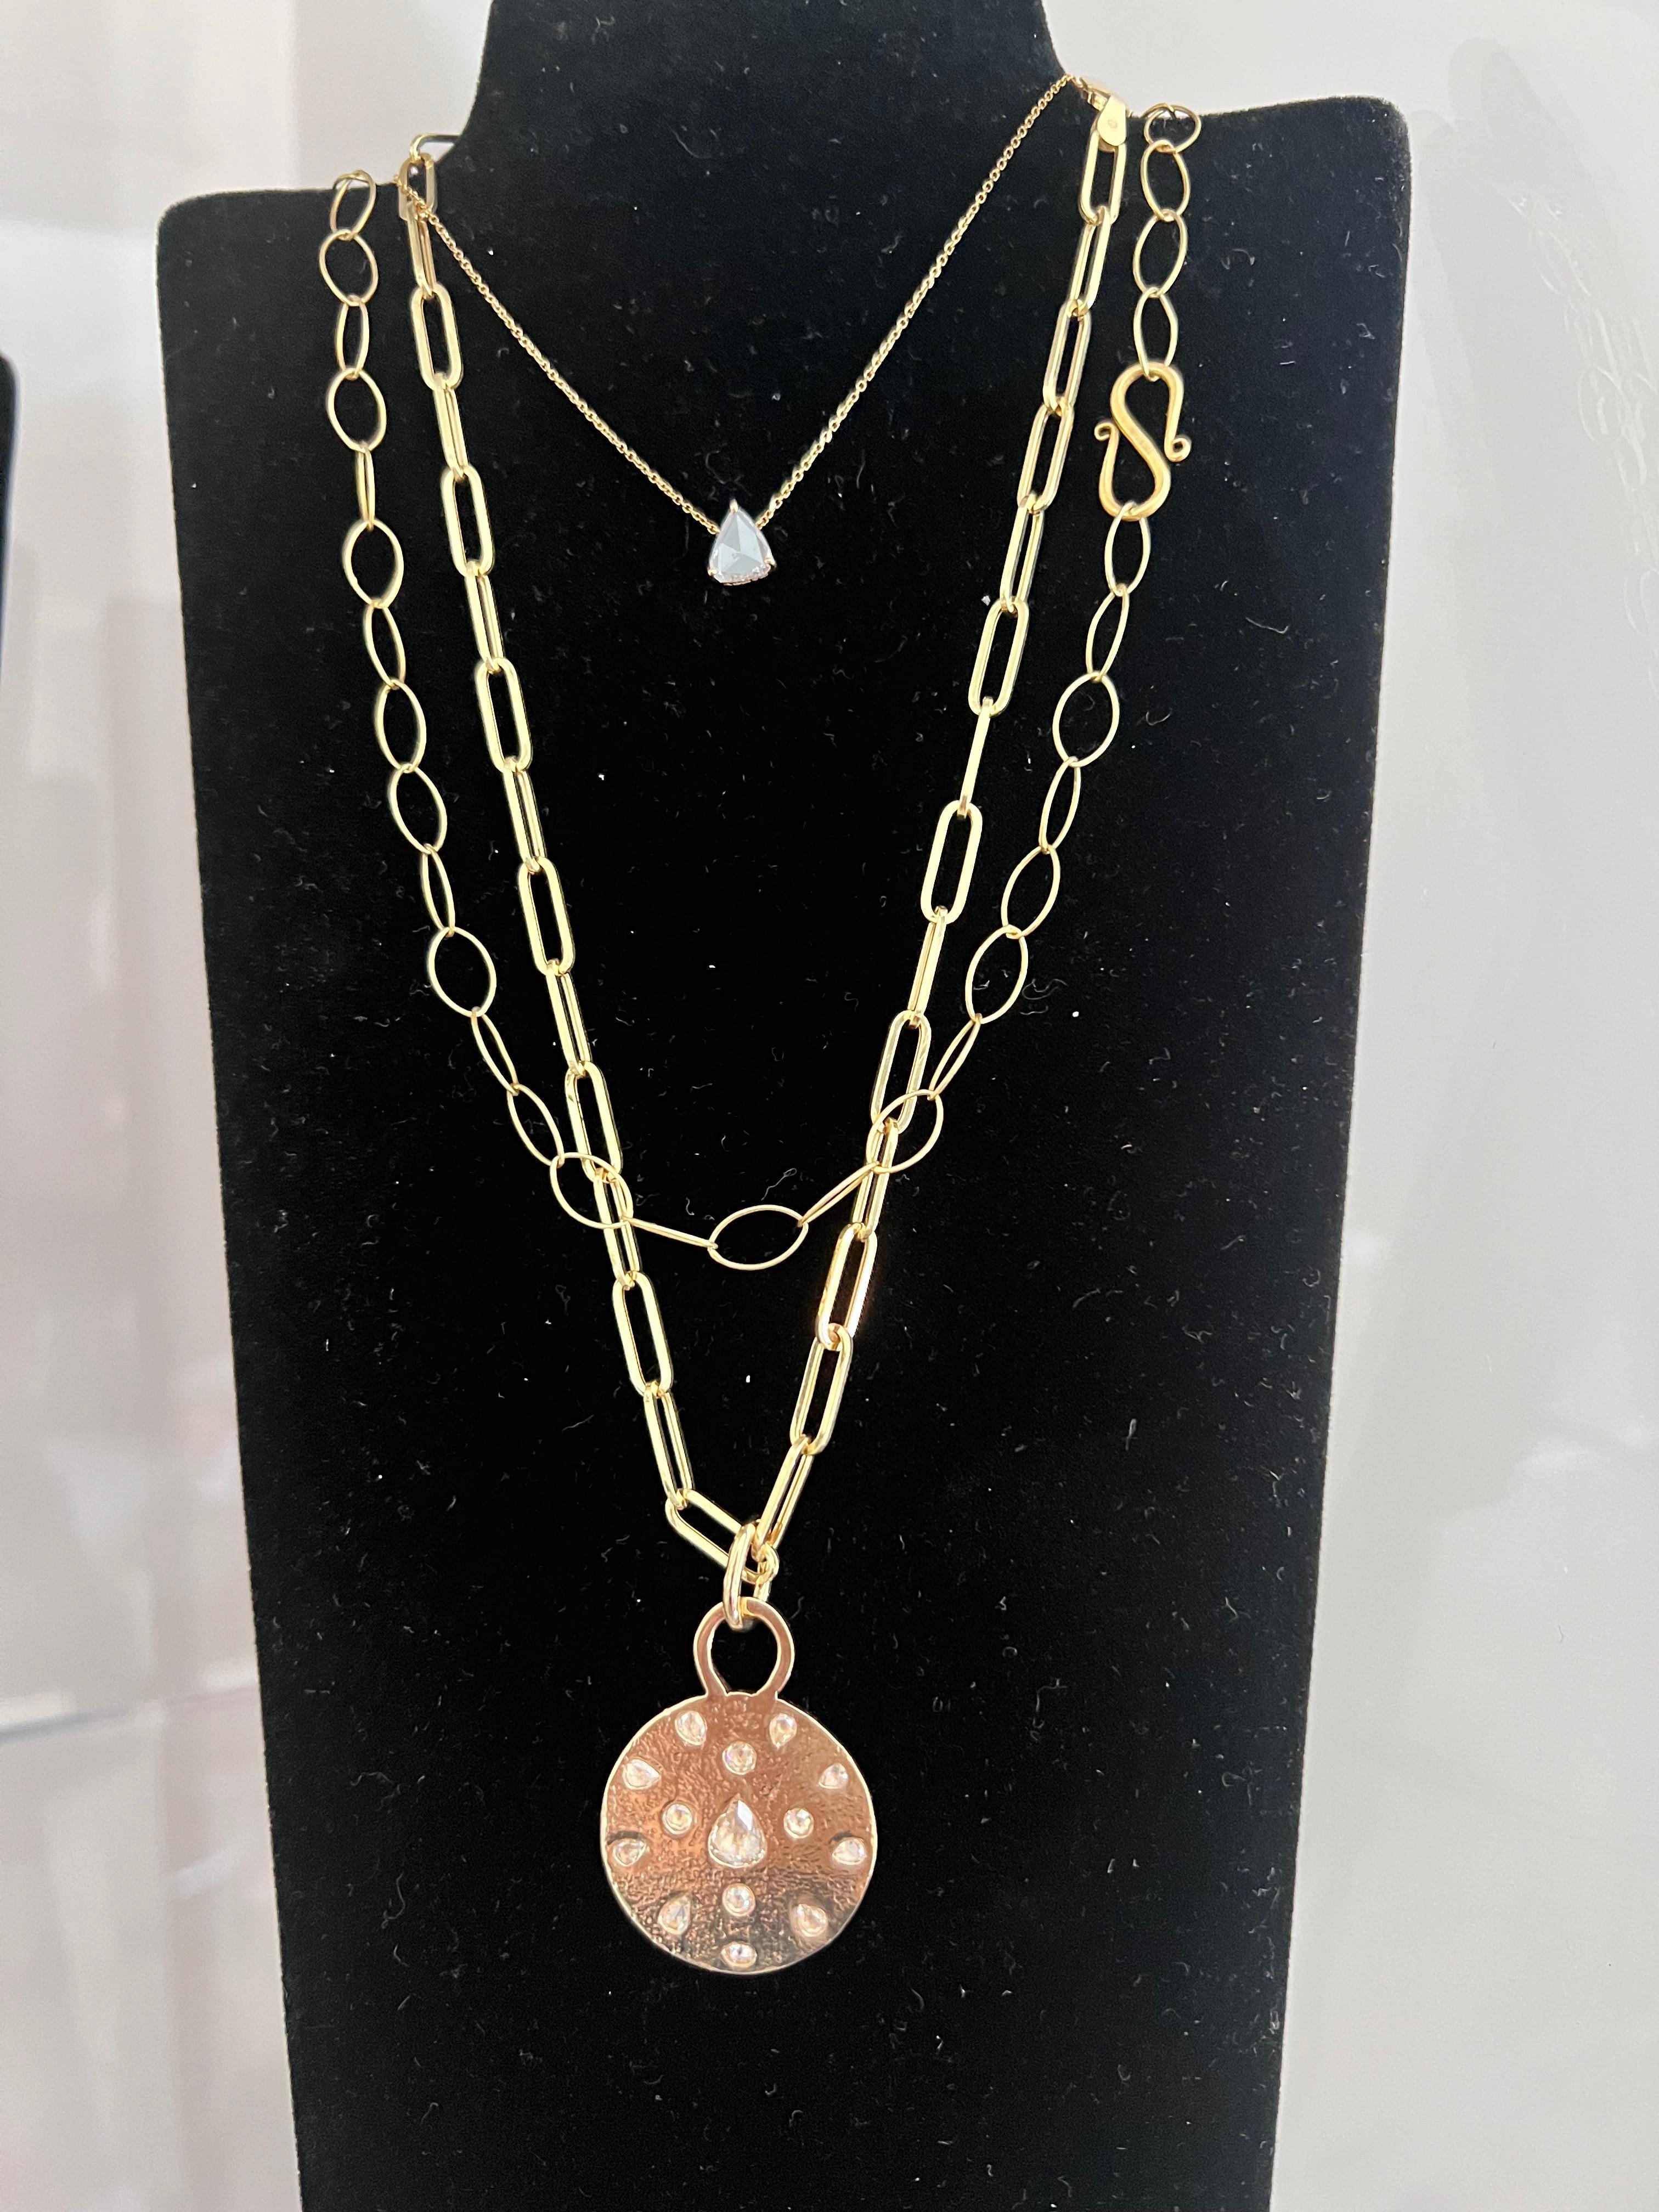 One only, totally handmade, solid gold Mandala necklace in solid 18k yellow gold. Heavy, very substantial. With over 3.5 CT’s of rose cut genuine VS1 diamonds. Comes with a 18” handmade chain in 18k as well. Or purchase just the Mandala. Infused